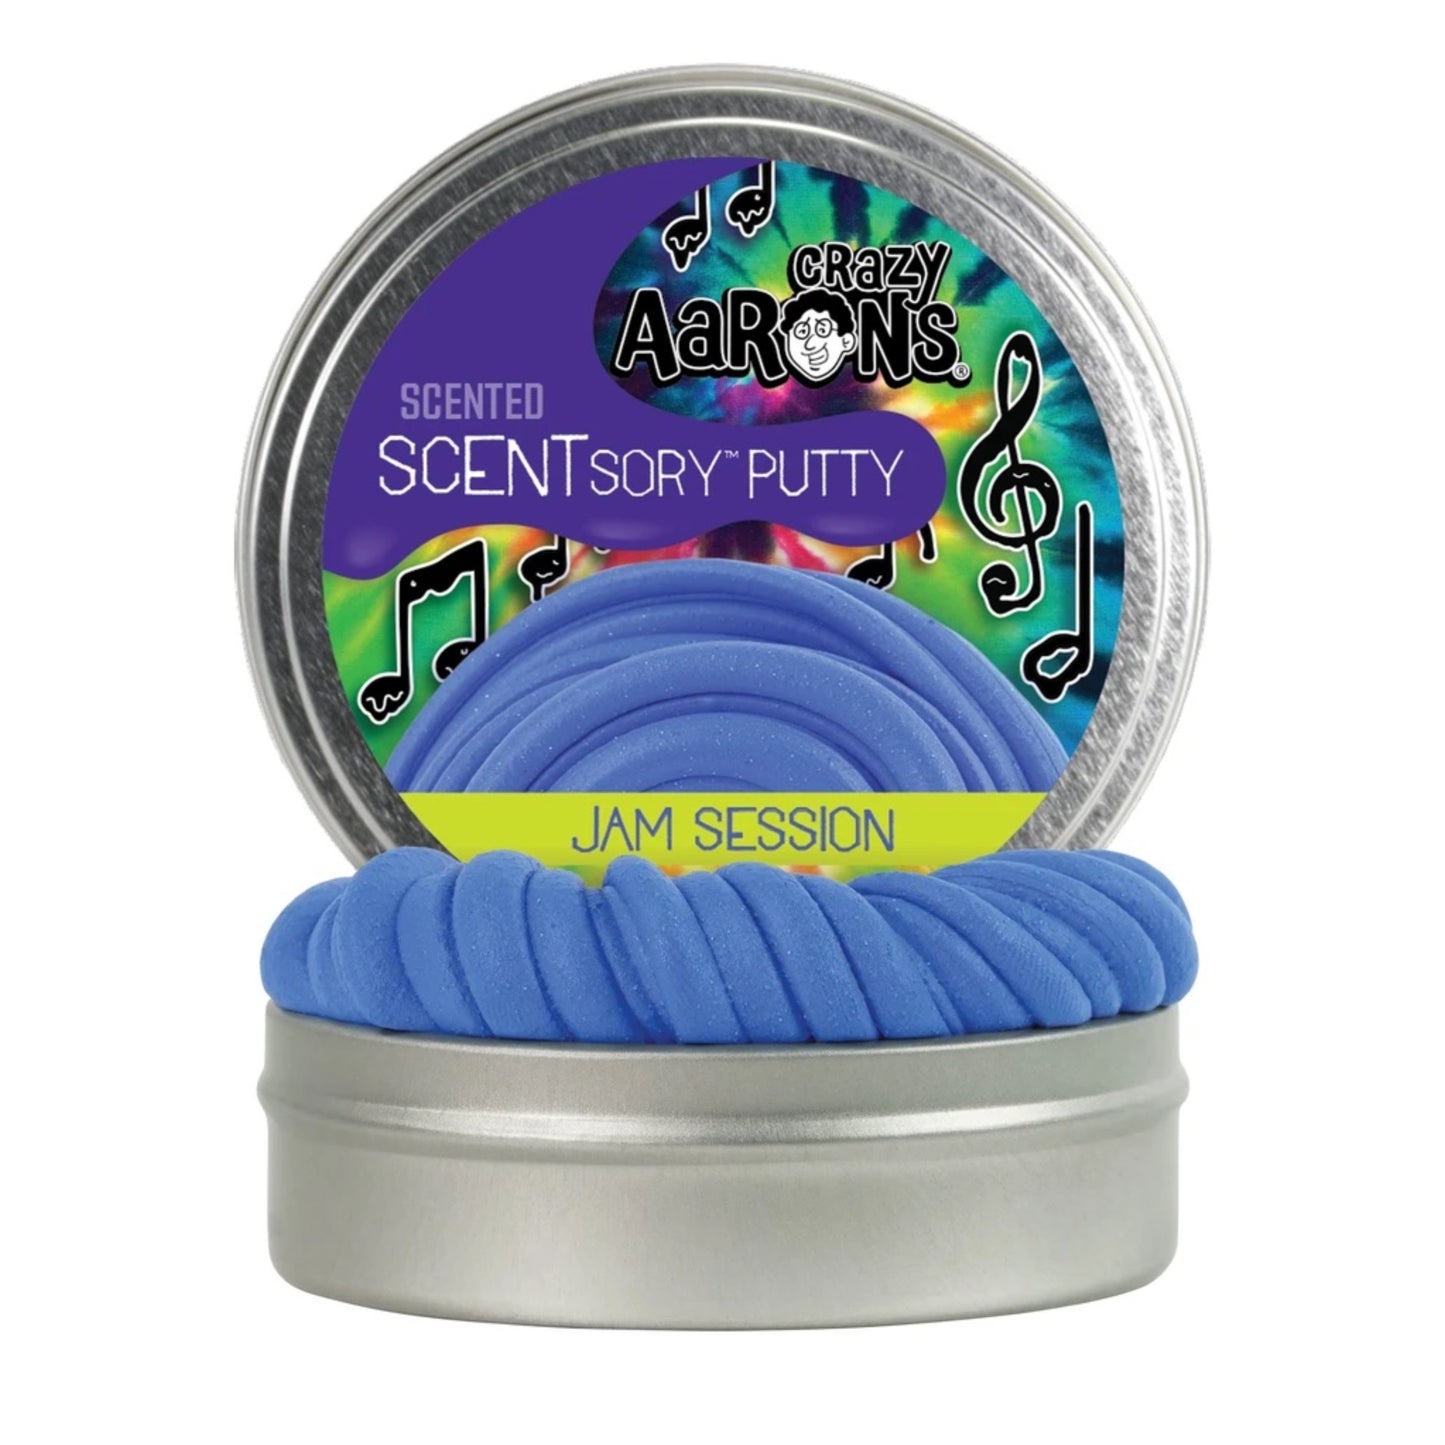 Jam Session SCENTsory Putty